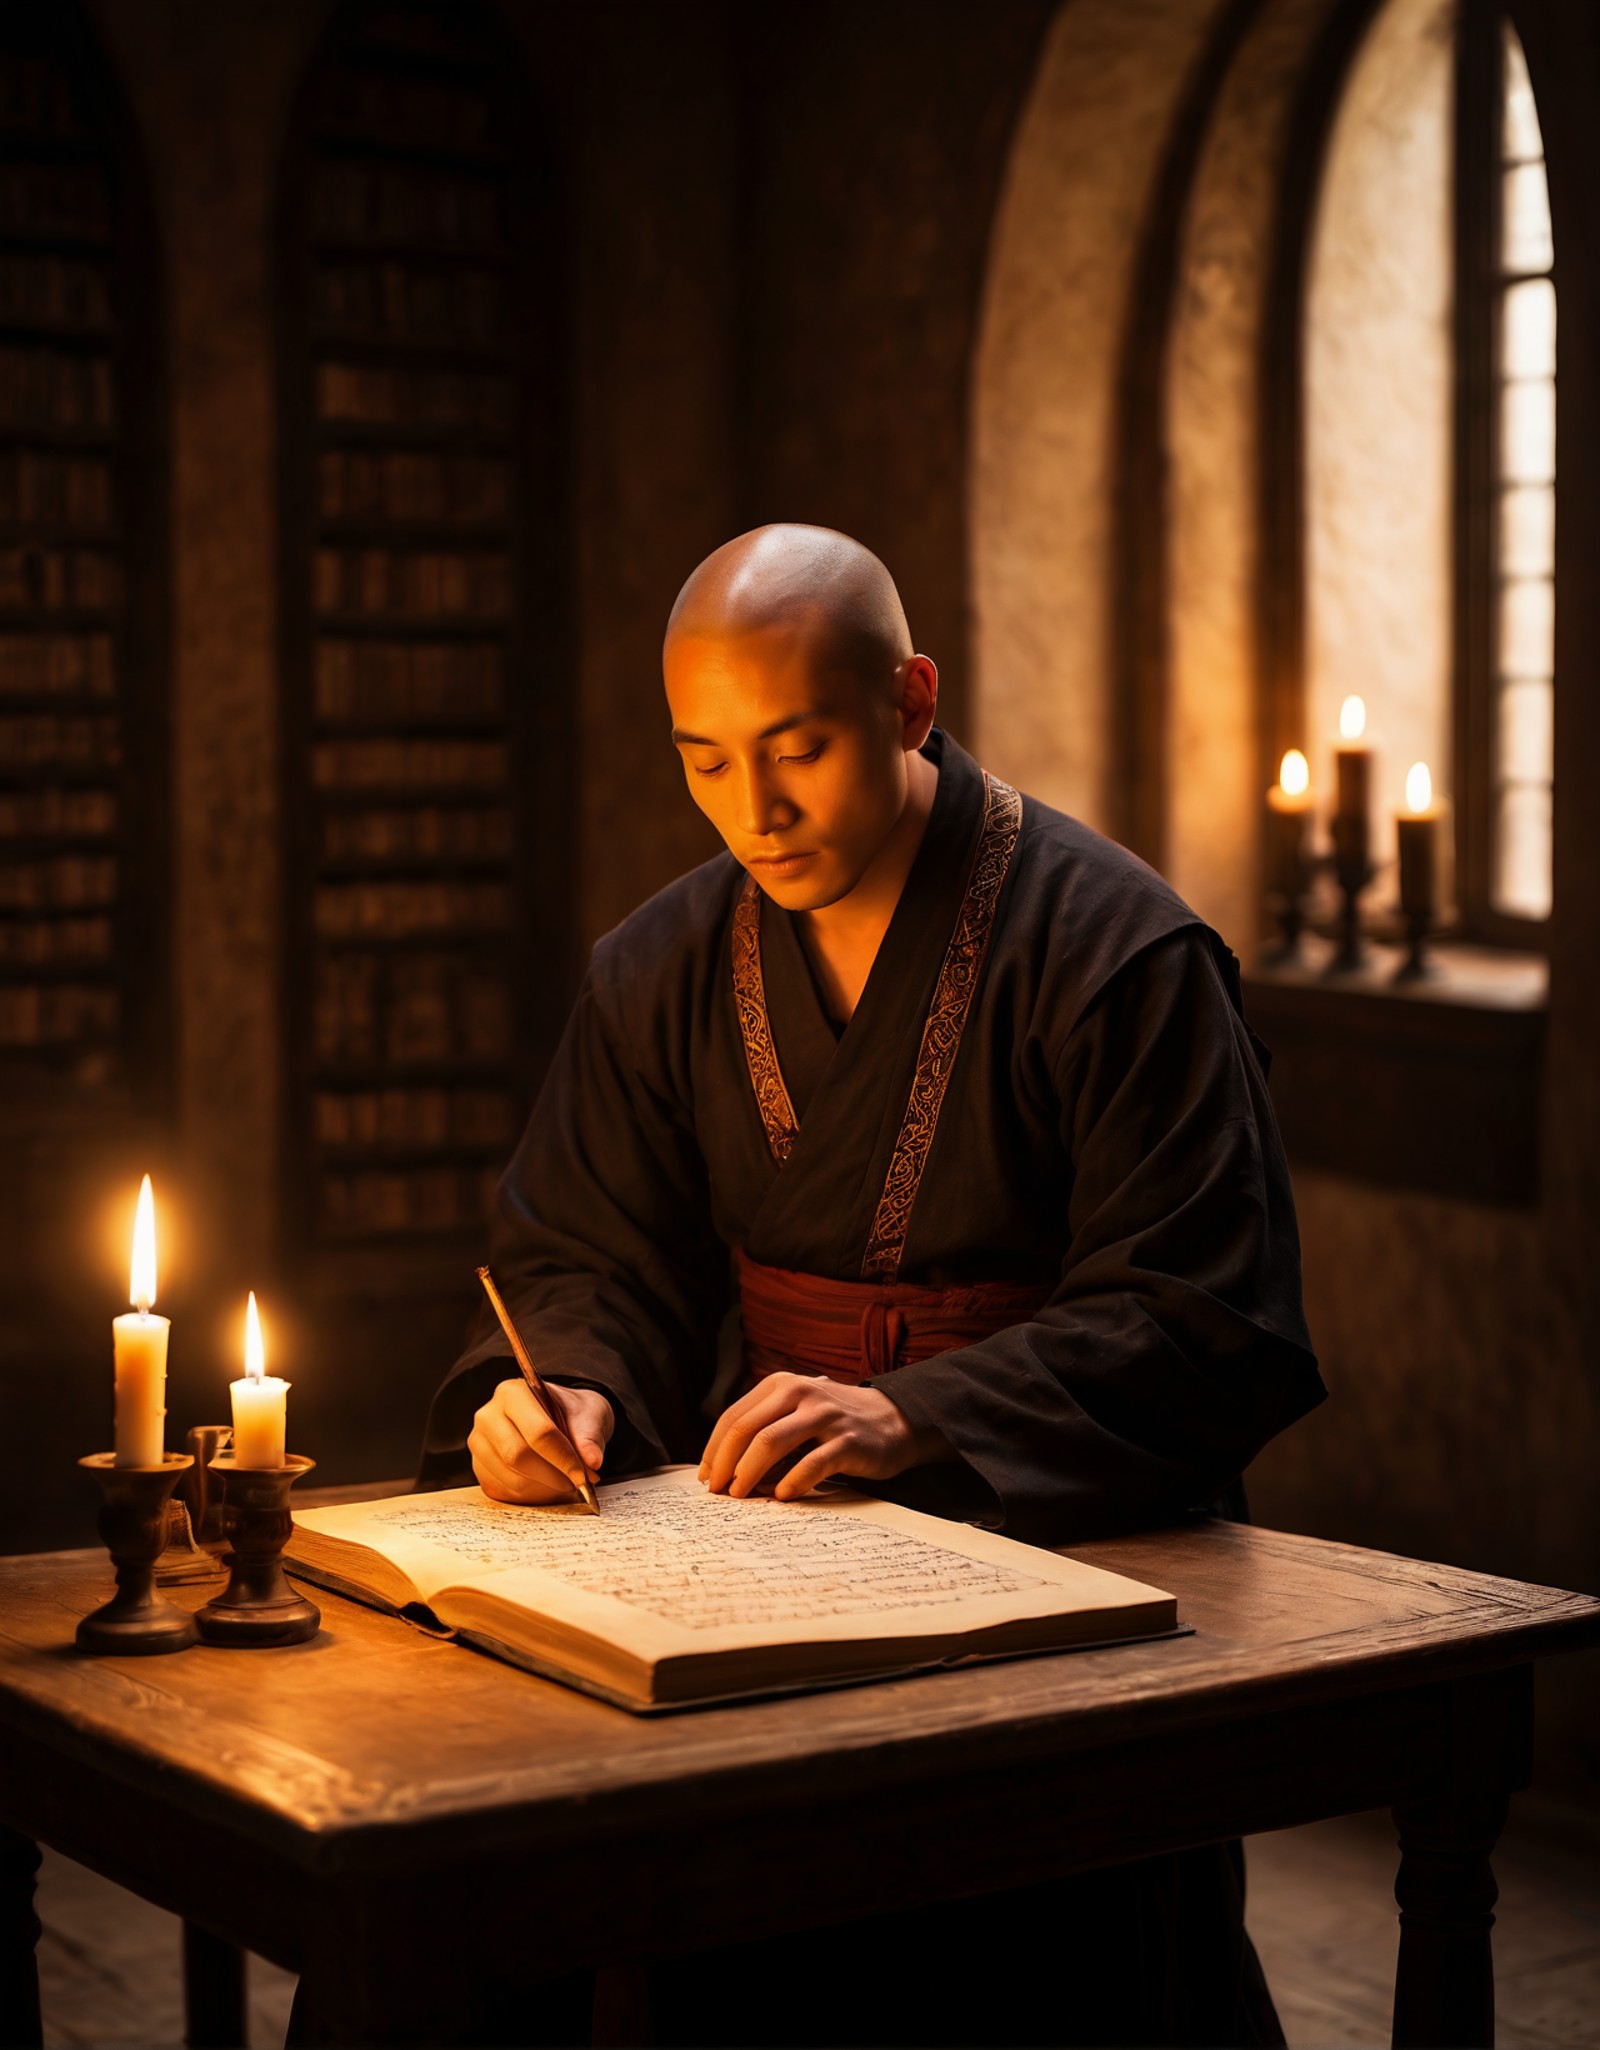 breathtaking photograph, In a medieval scriptorium, a novice monk carefully illuminates a manuscript, his table lit by the...